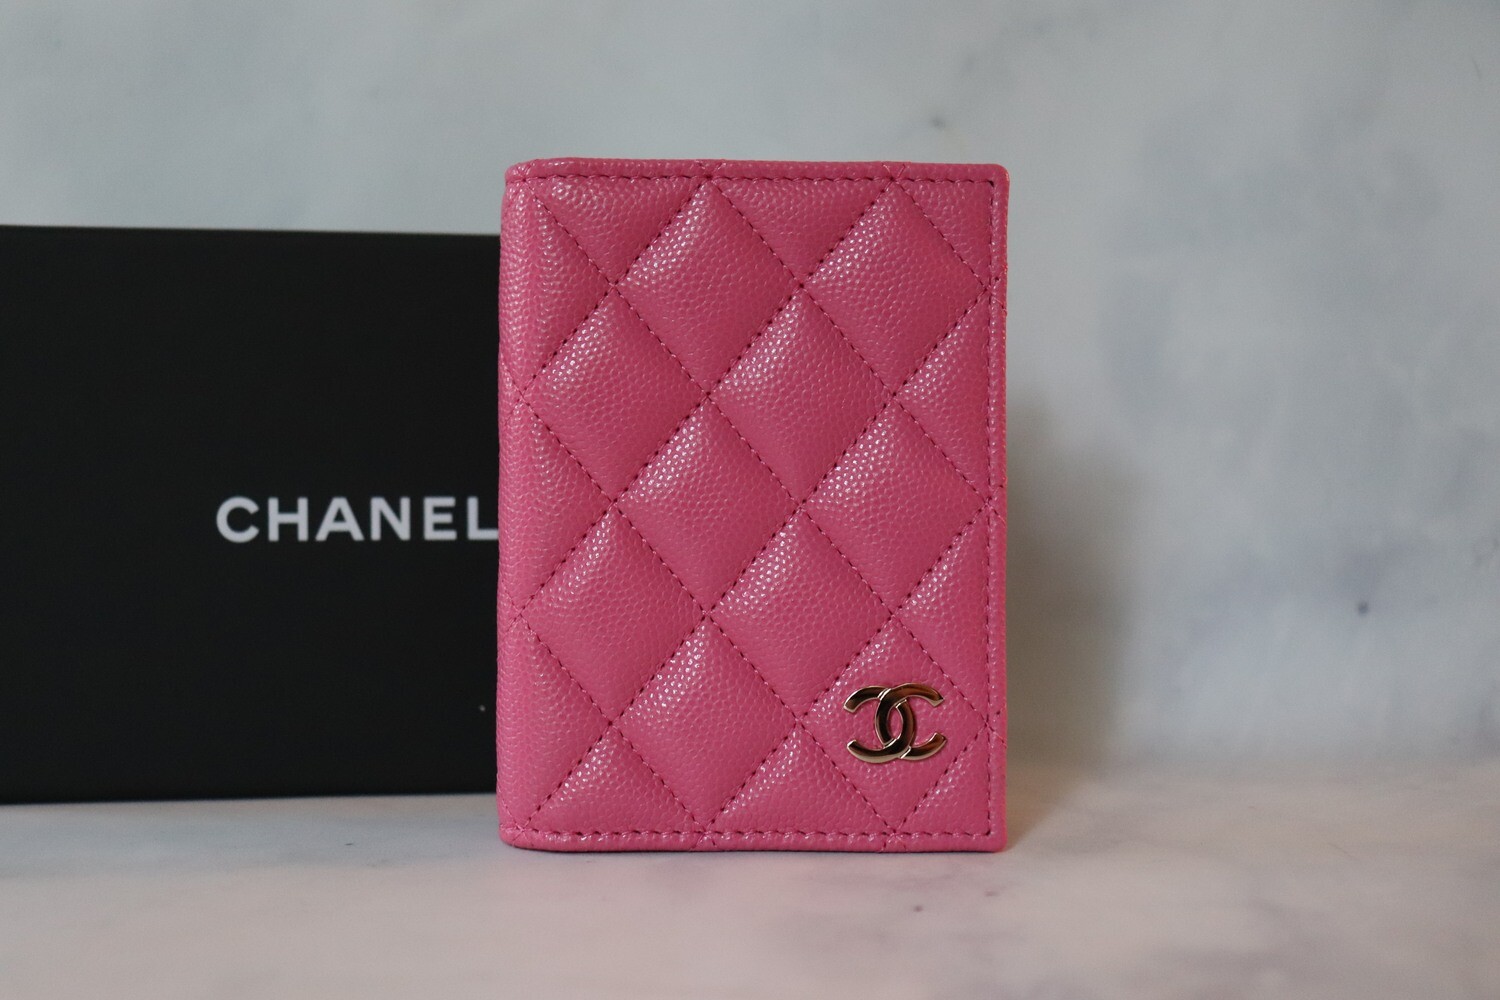 Chanel SLG Bifold Card Case, 20S Pink with Light Gold Hardware